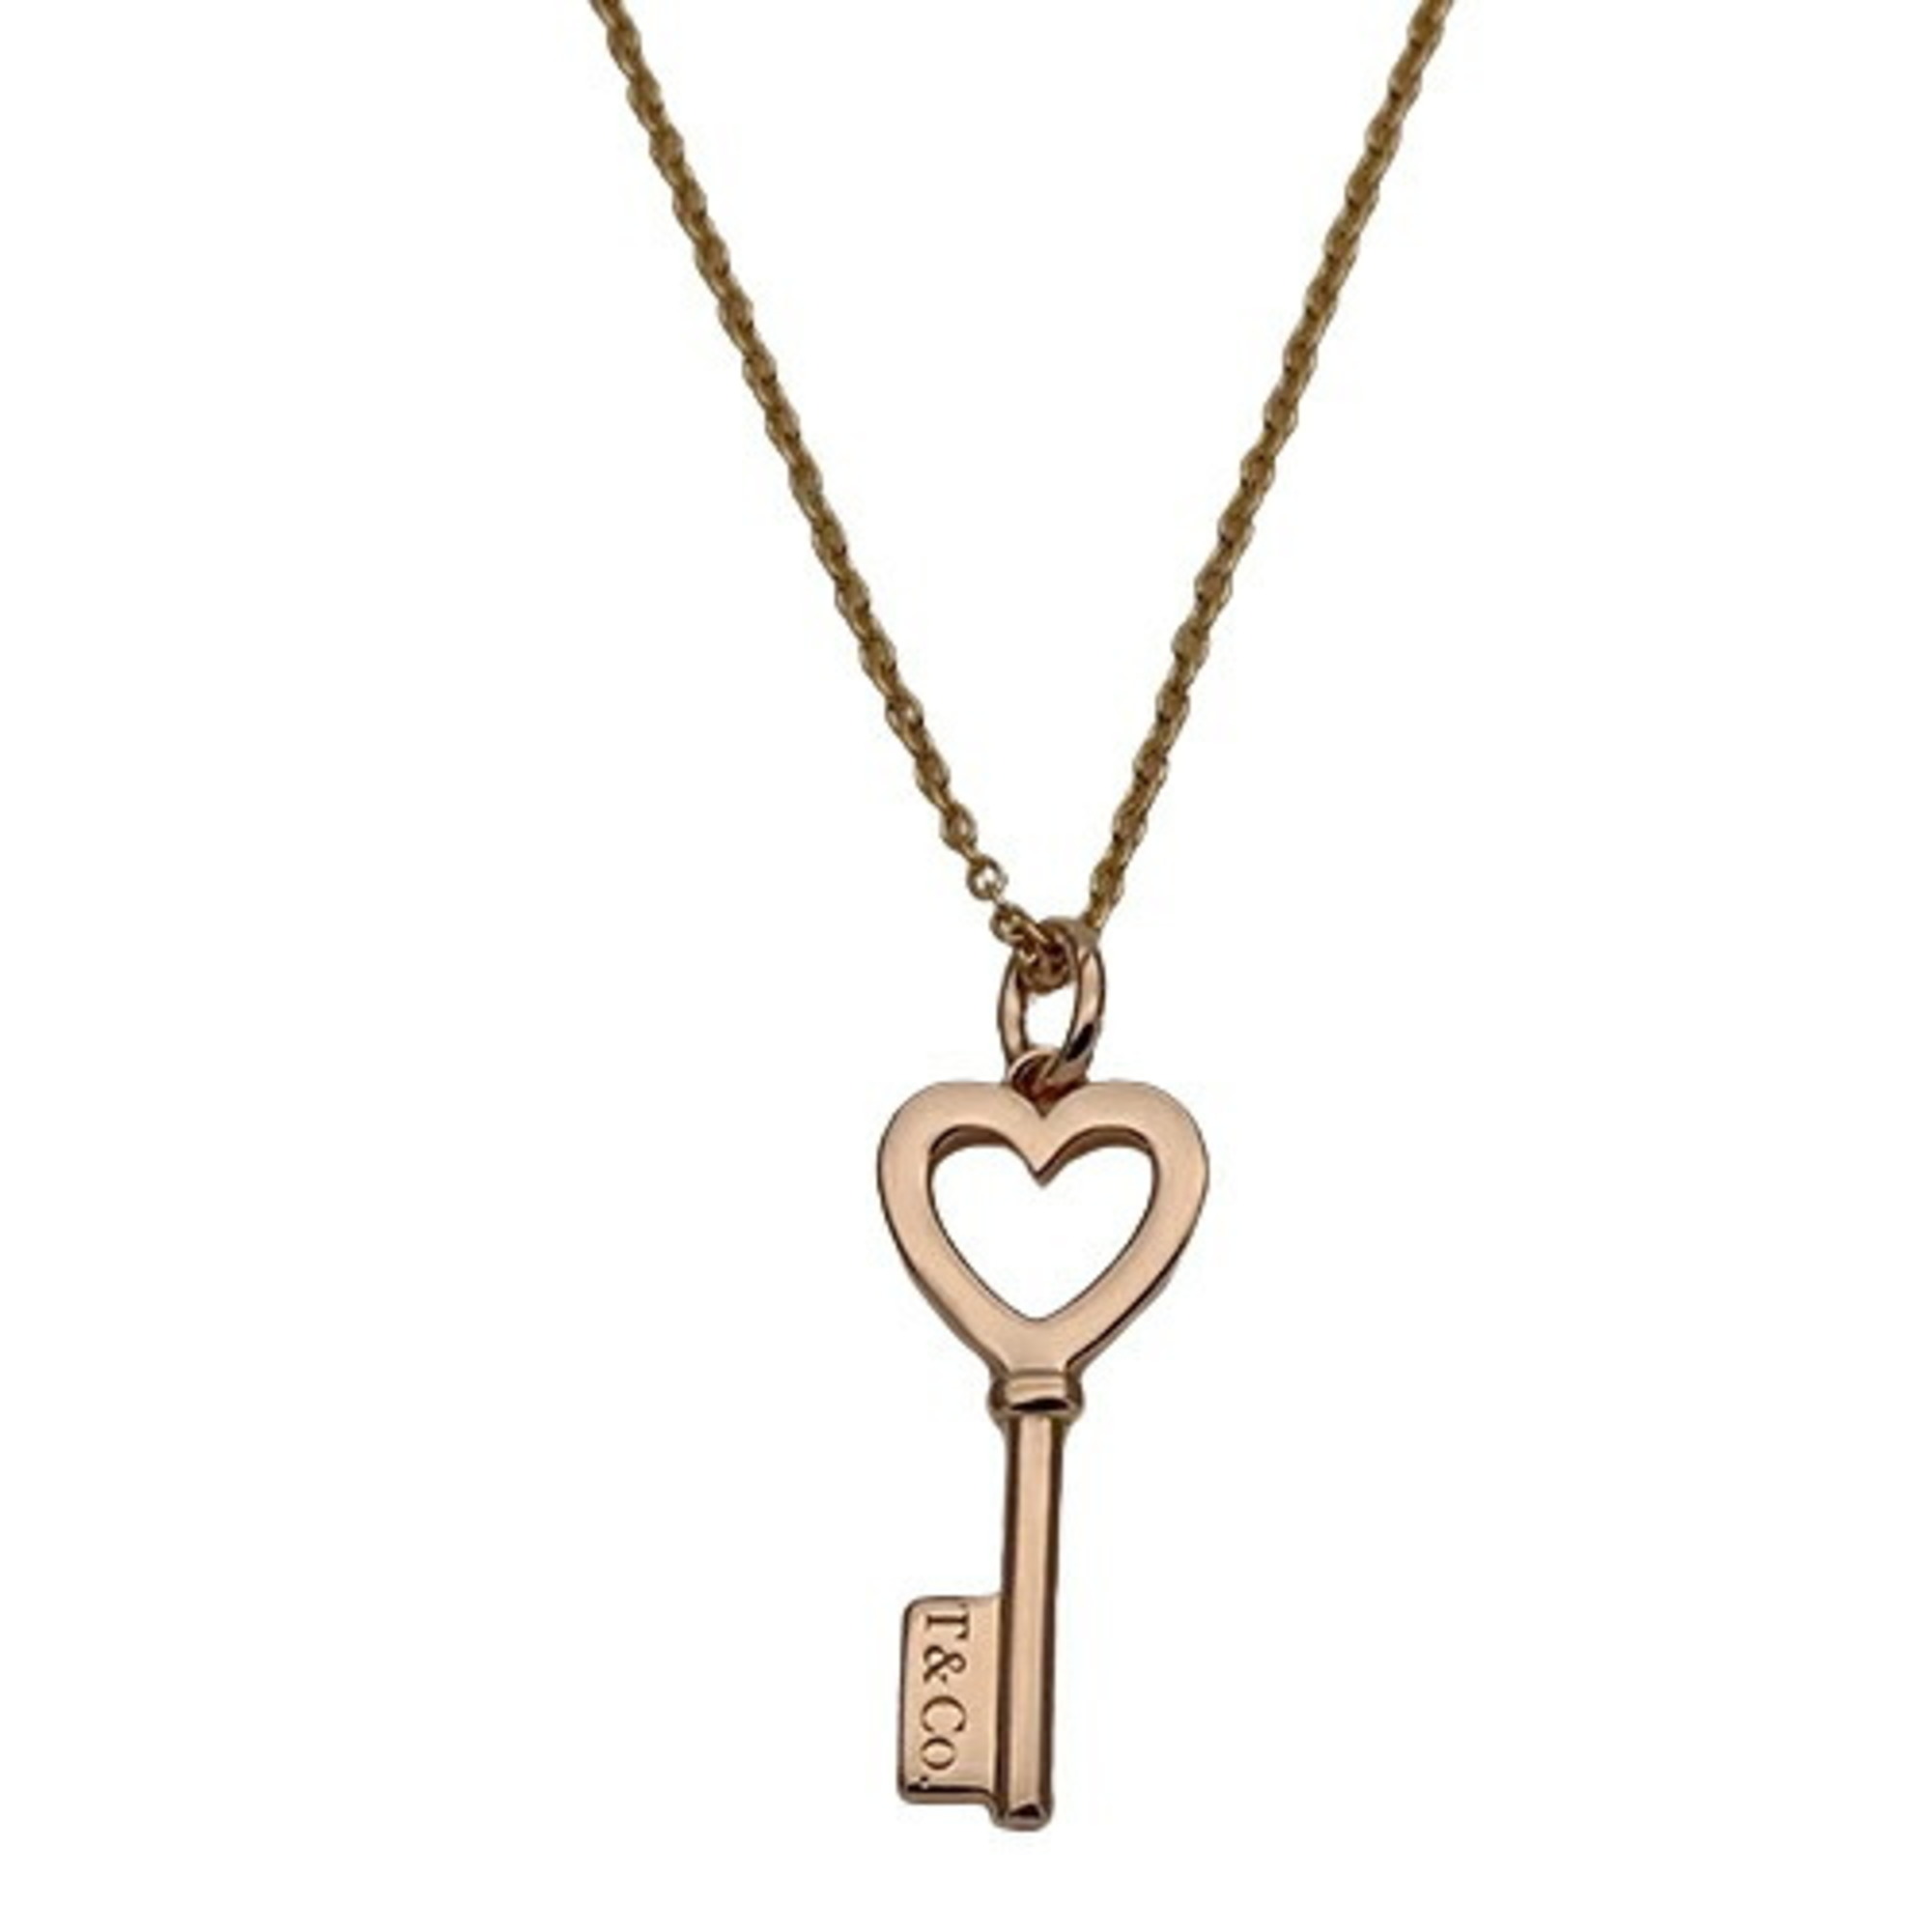 Tiffany & Co. Necklace for women, 750PG, heart key, pink gold, polished